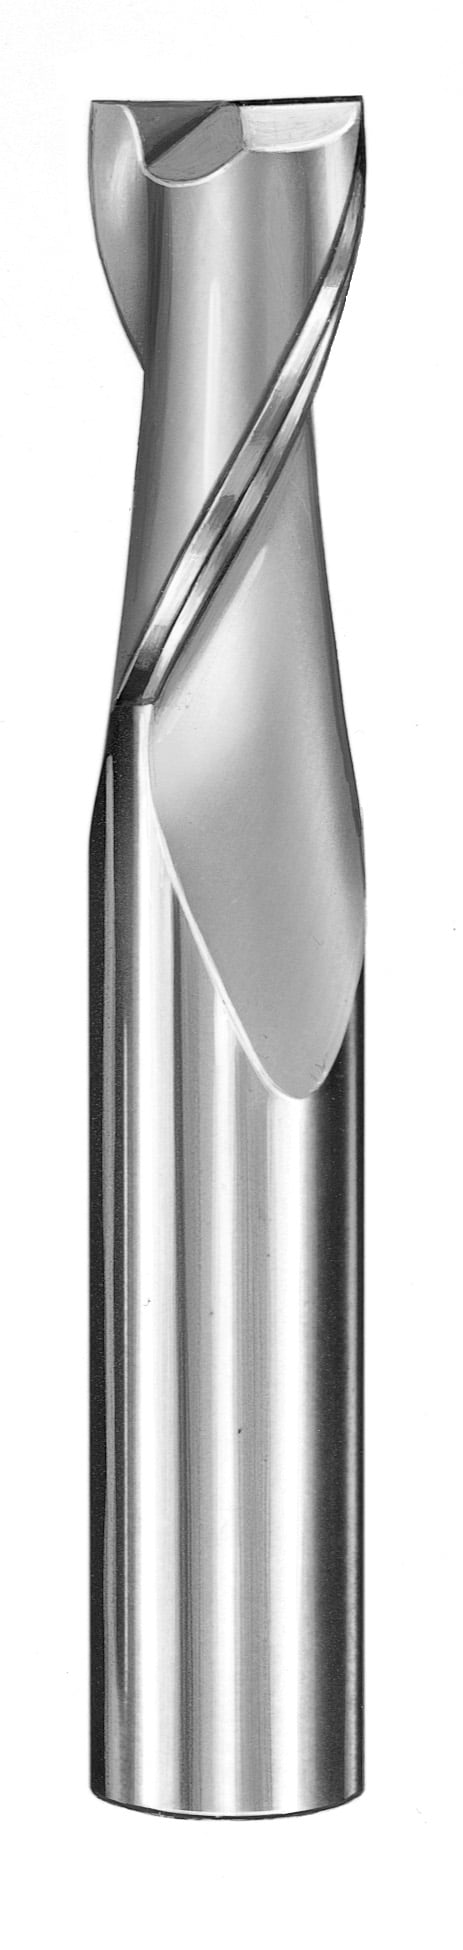 7/32" Dia, 2 Flute, Square End End Mill - 30327